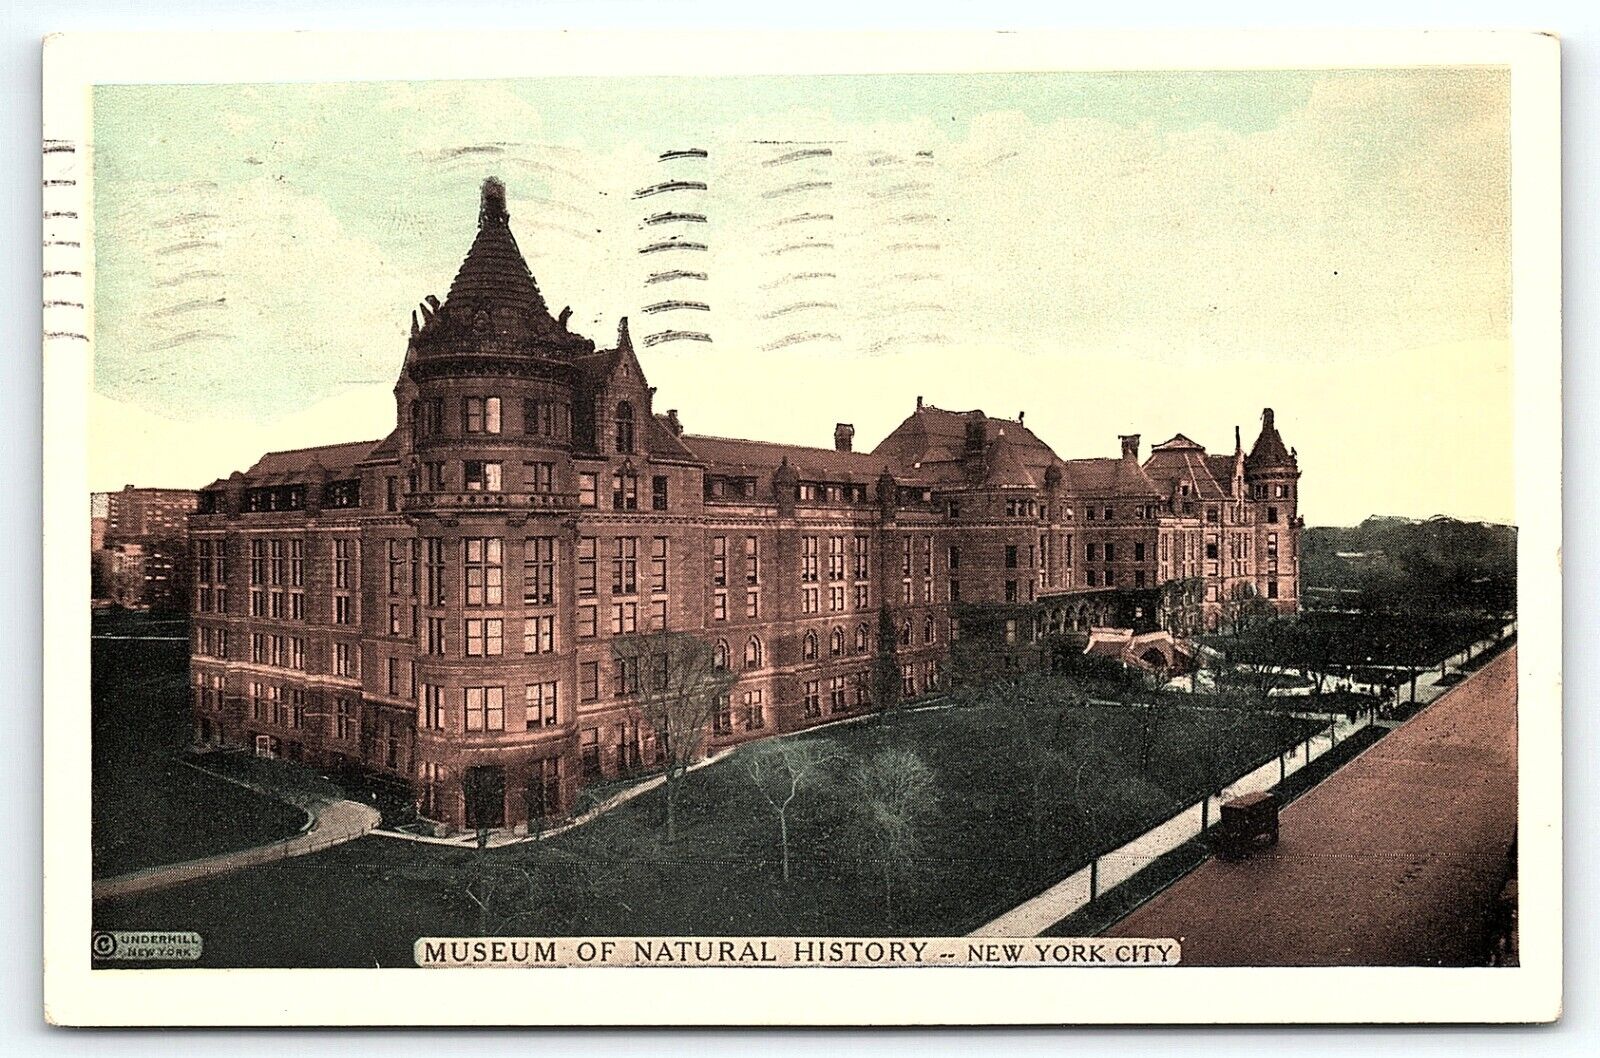 1936 NEW YORK CITY MUSEUM OF NATURAL HISTORY POSTCARD P3623